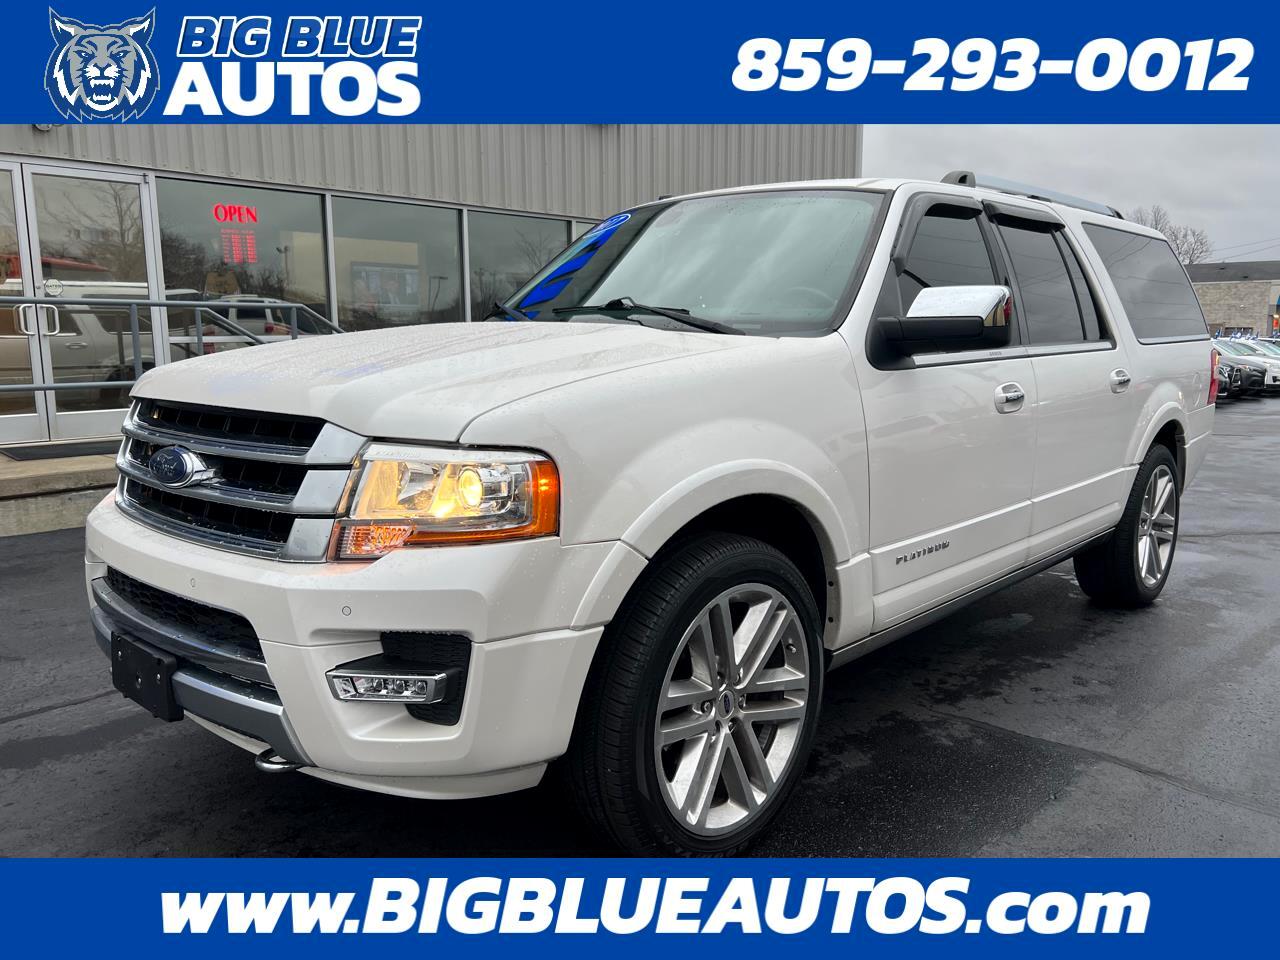 Used 2017 Ford Expedition EL Platinum 4x4 for Sale in Lexington KY 40505  Big Blue Autos